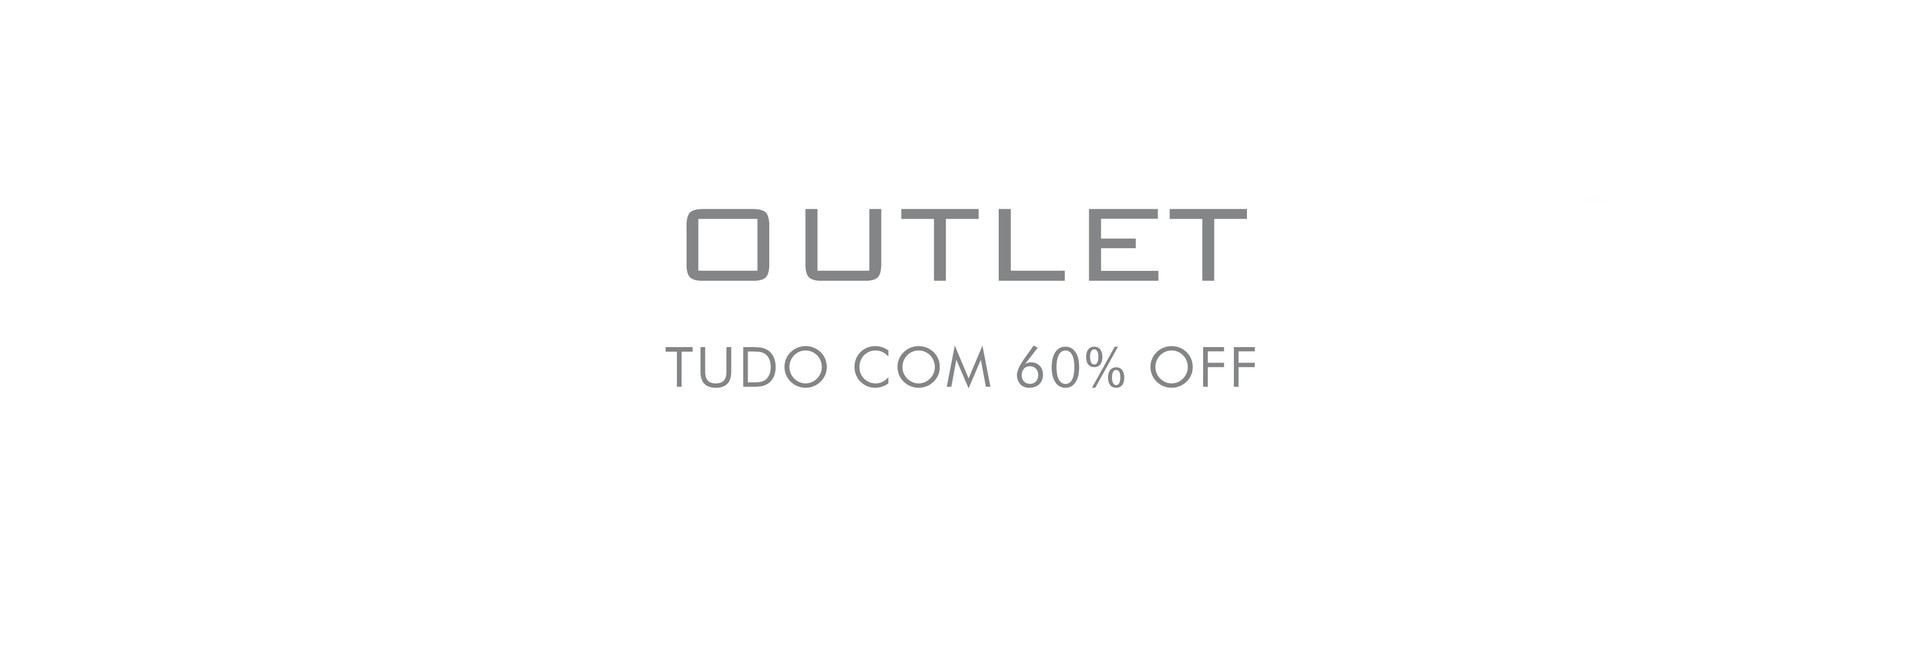 banner-tag-outlet